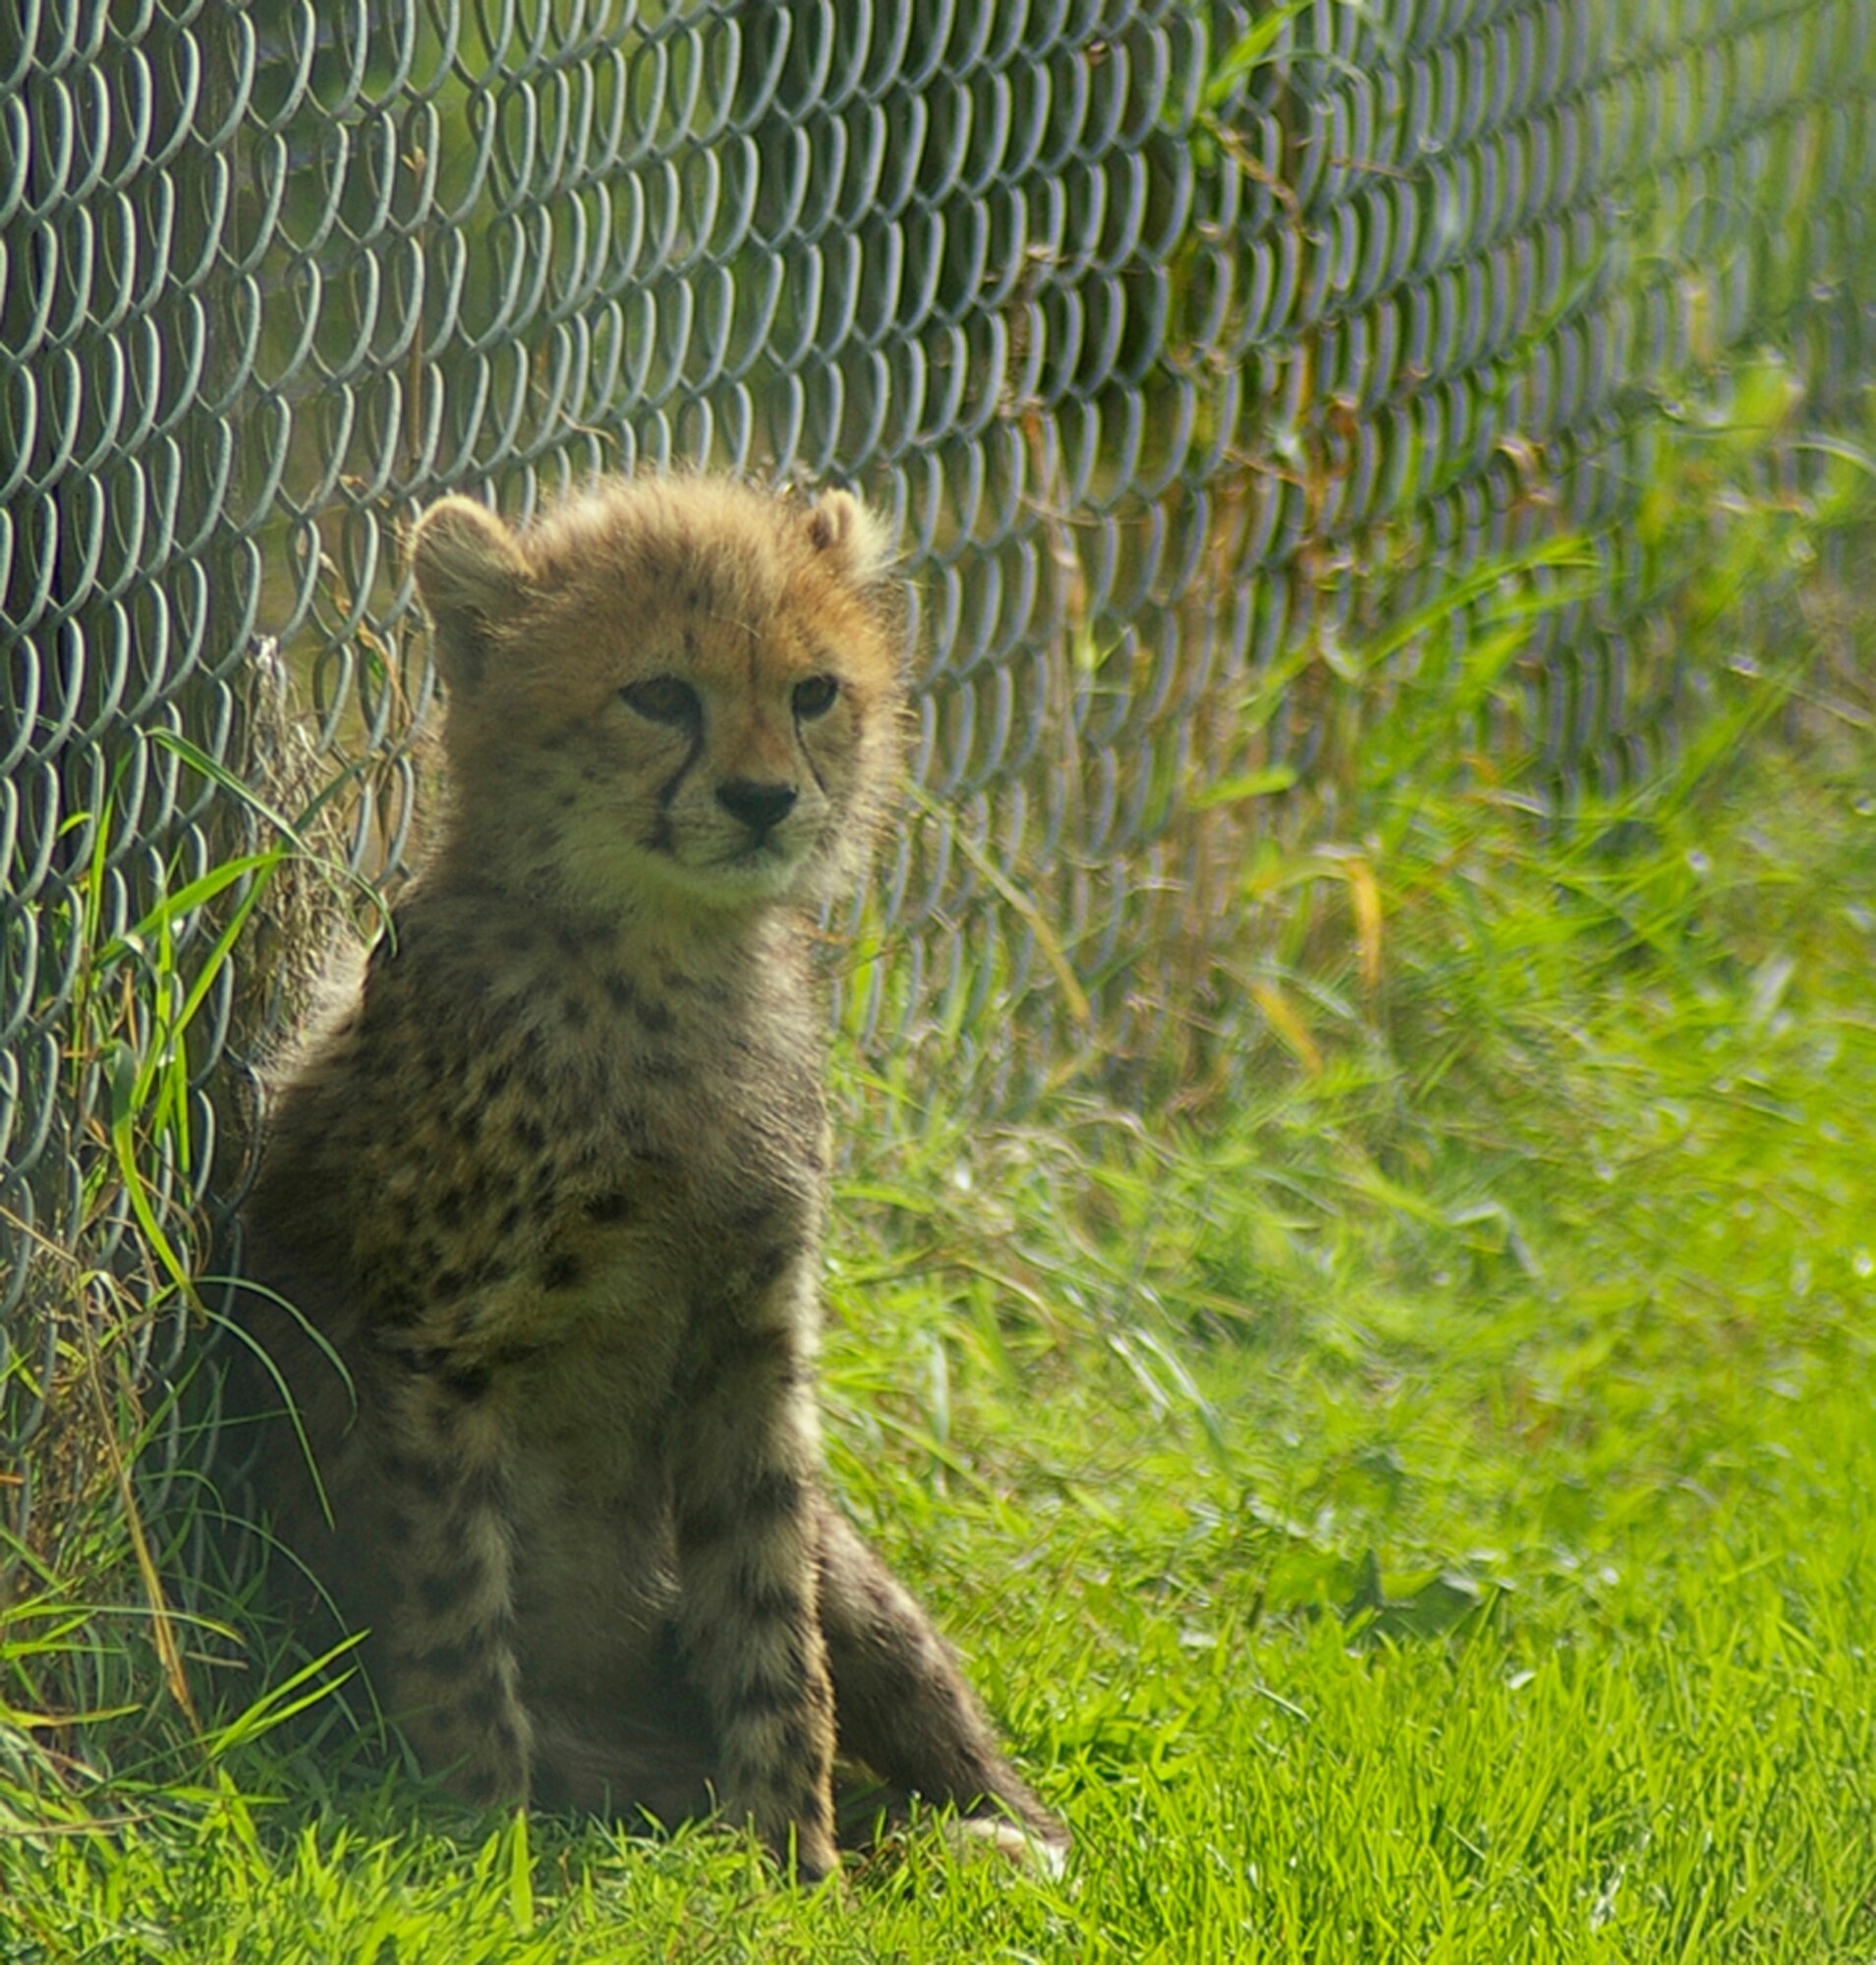 This cheetah cub is one of five born June 7 at Africa Alive. Cheetahs are just one of the many African animals people can see at the wildlife park near Lowestoft. (U.S. Air Force photo by Karen Abeyasekere)